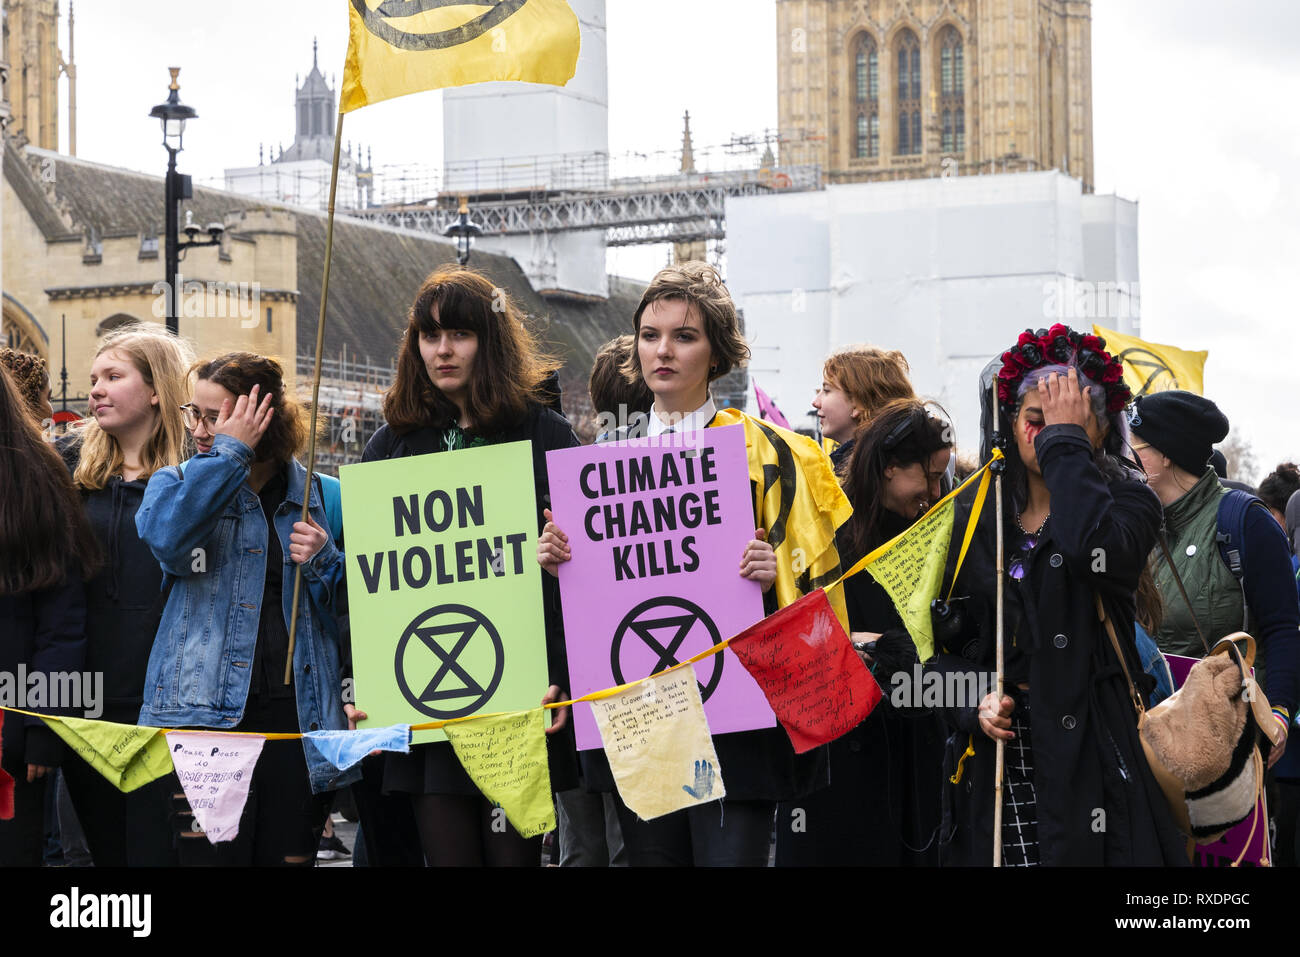 London, UK. 9th Mar, 2019. Extinction Rebellion Rally a demonstration at Downing Street. Women holding banners 'Non-Violent' and 'Climate Change Kills'. Credit: AndKa/Alamy Live News Stock Photo